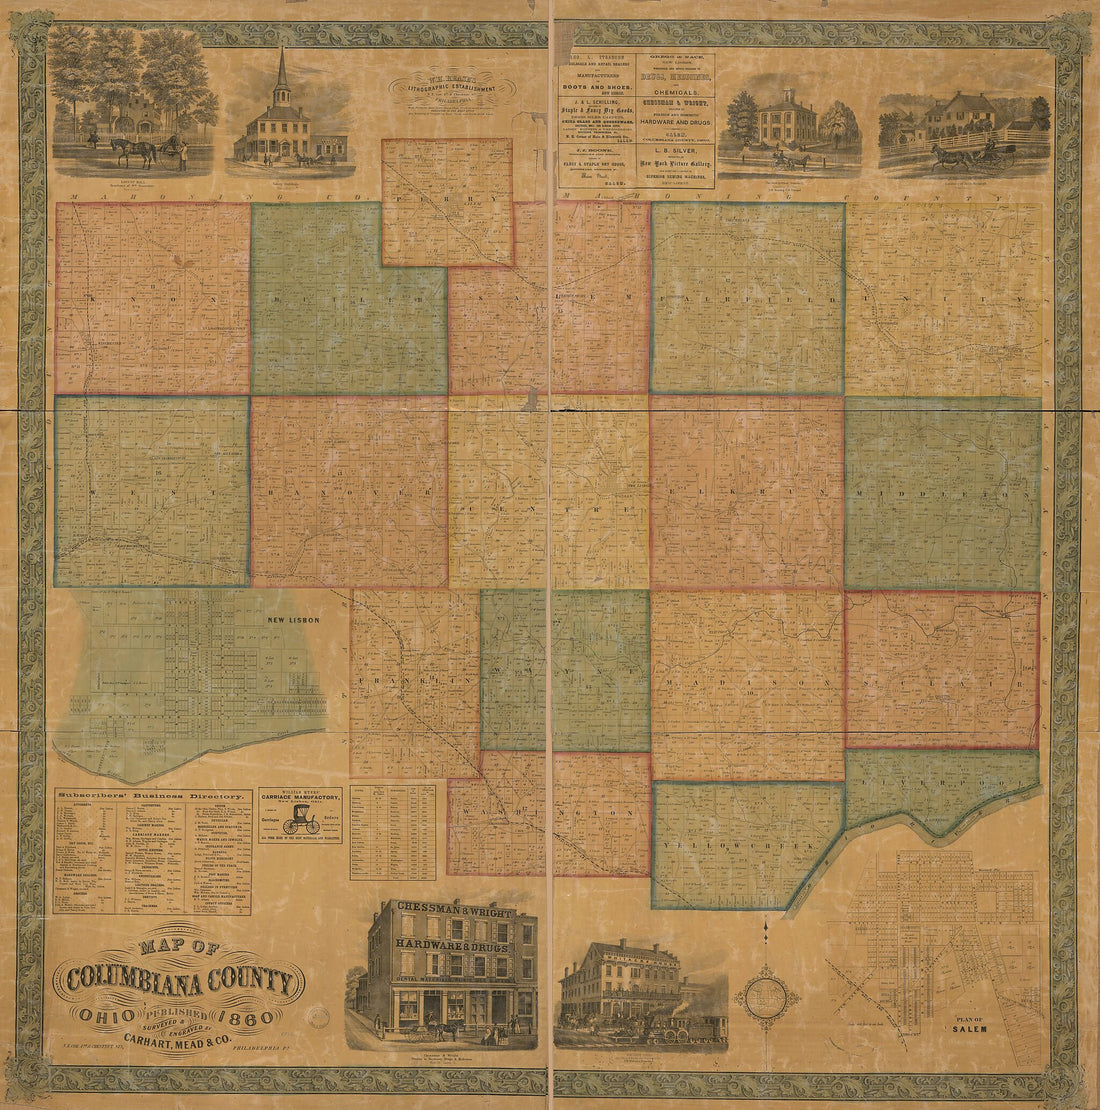 This old map of Map of Columbiana County, Ohio from 1860 was created by Mead &amp; Co Carhart in 1860